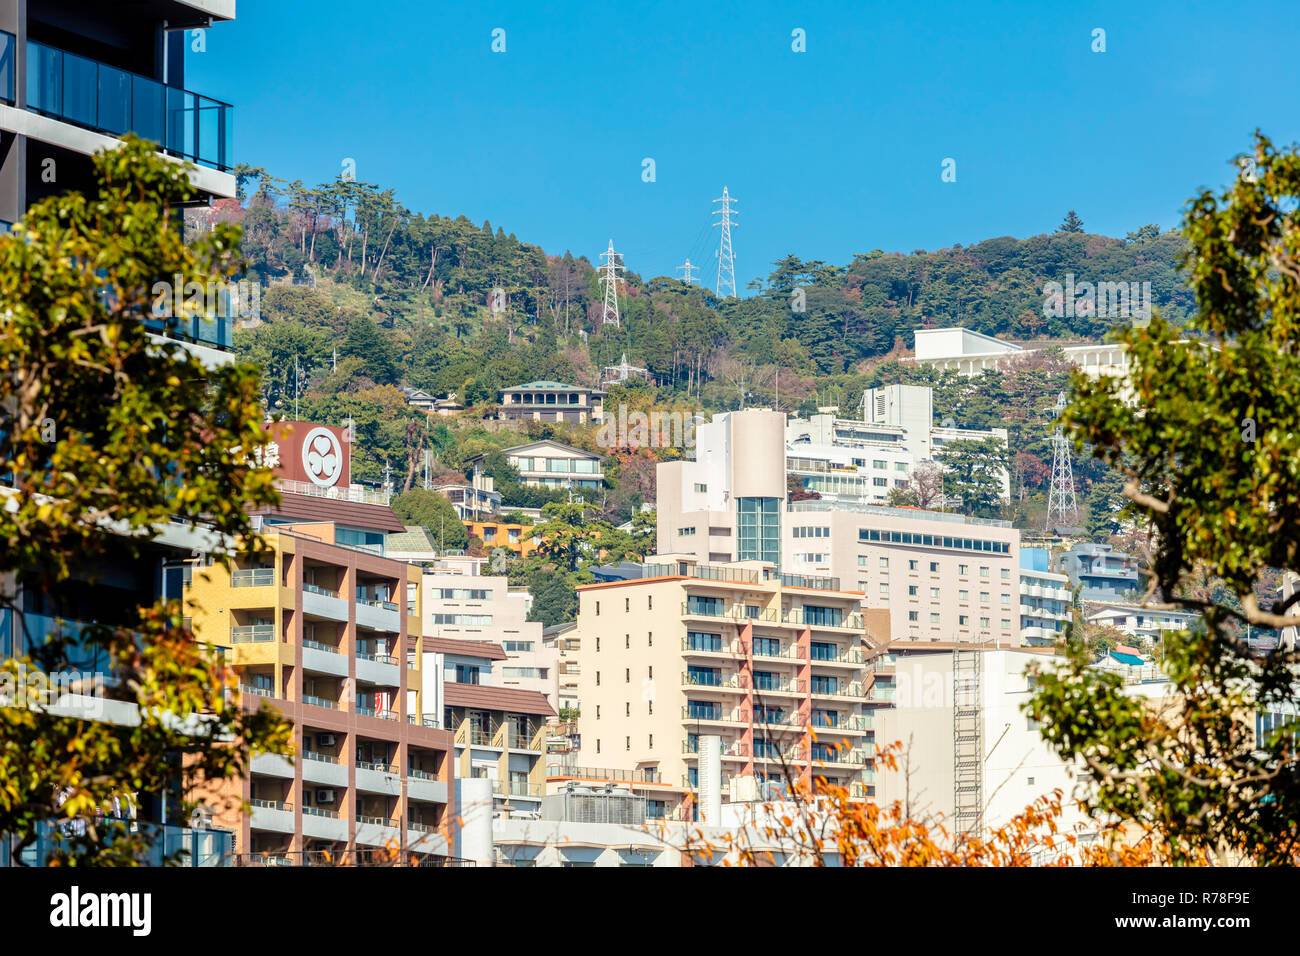 Atami, Shizuoka / Japan - December 1 2018: Aerial cityscape view of Atami beach and city centre, popular onsen leisure resort town in Autumn Stock Photo